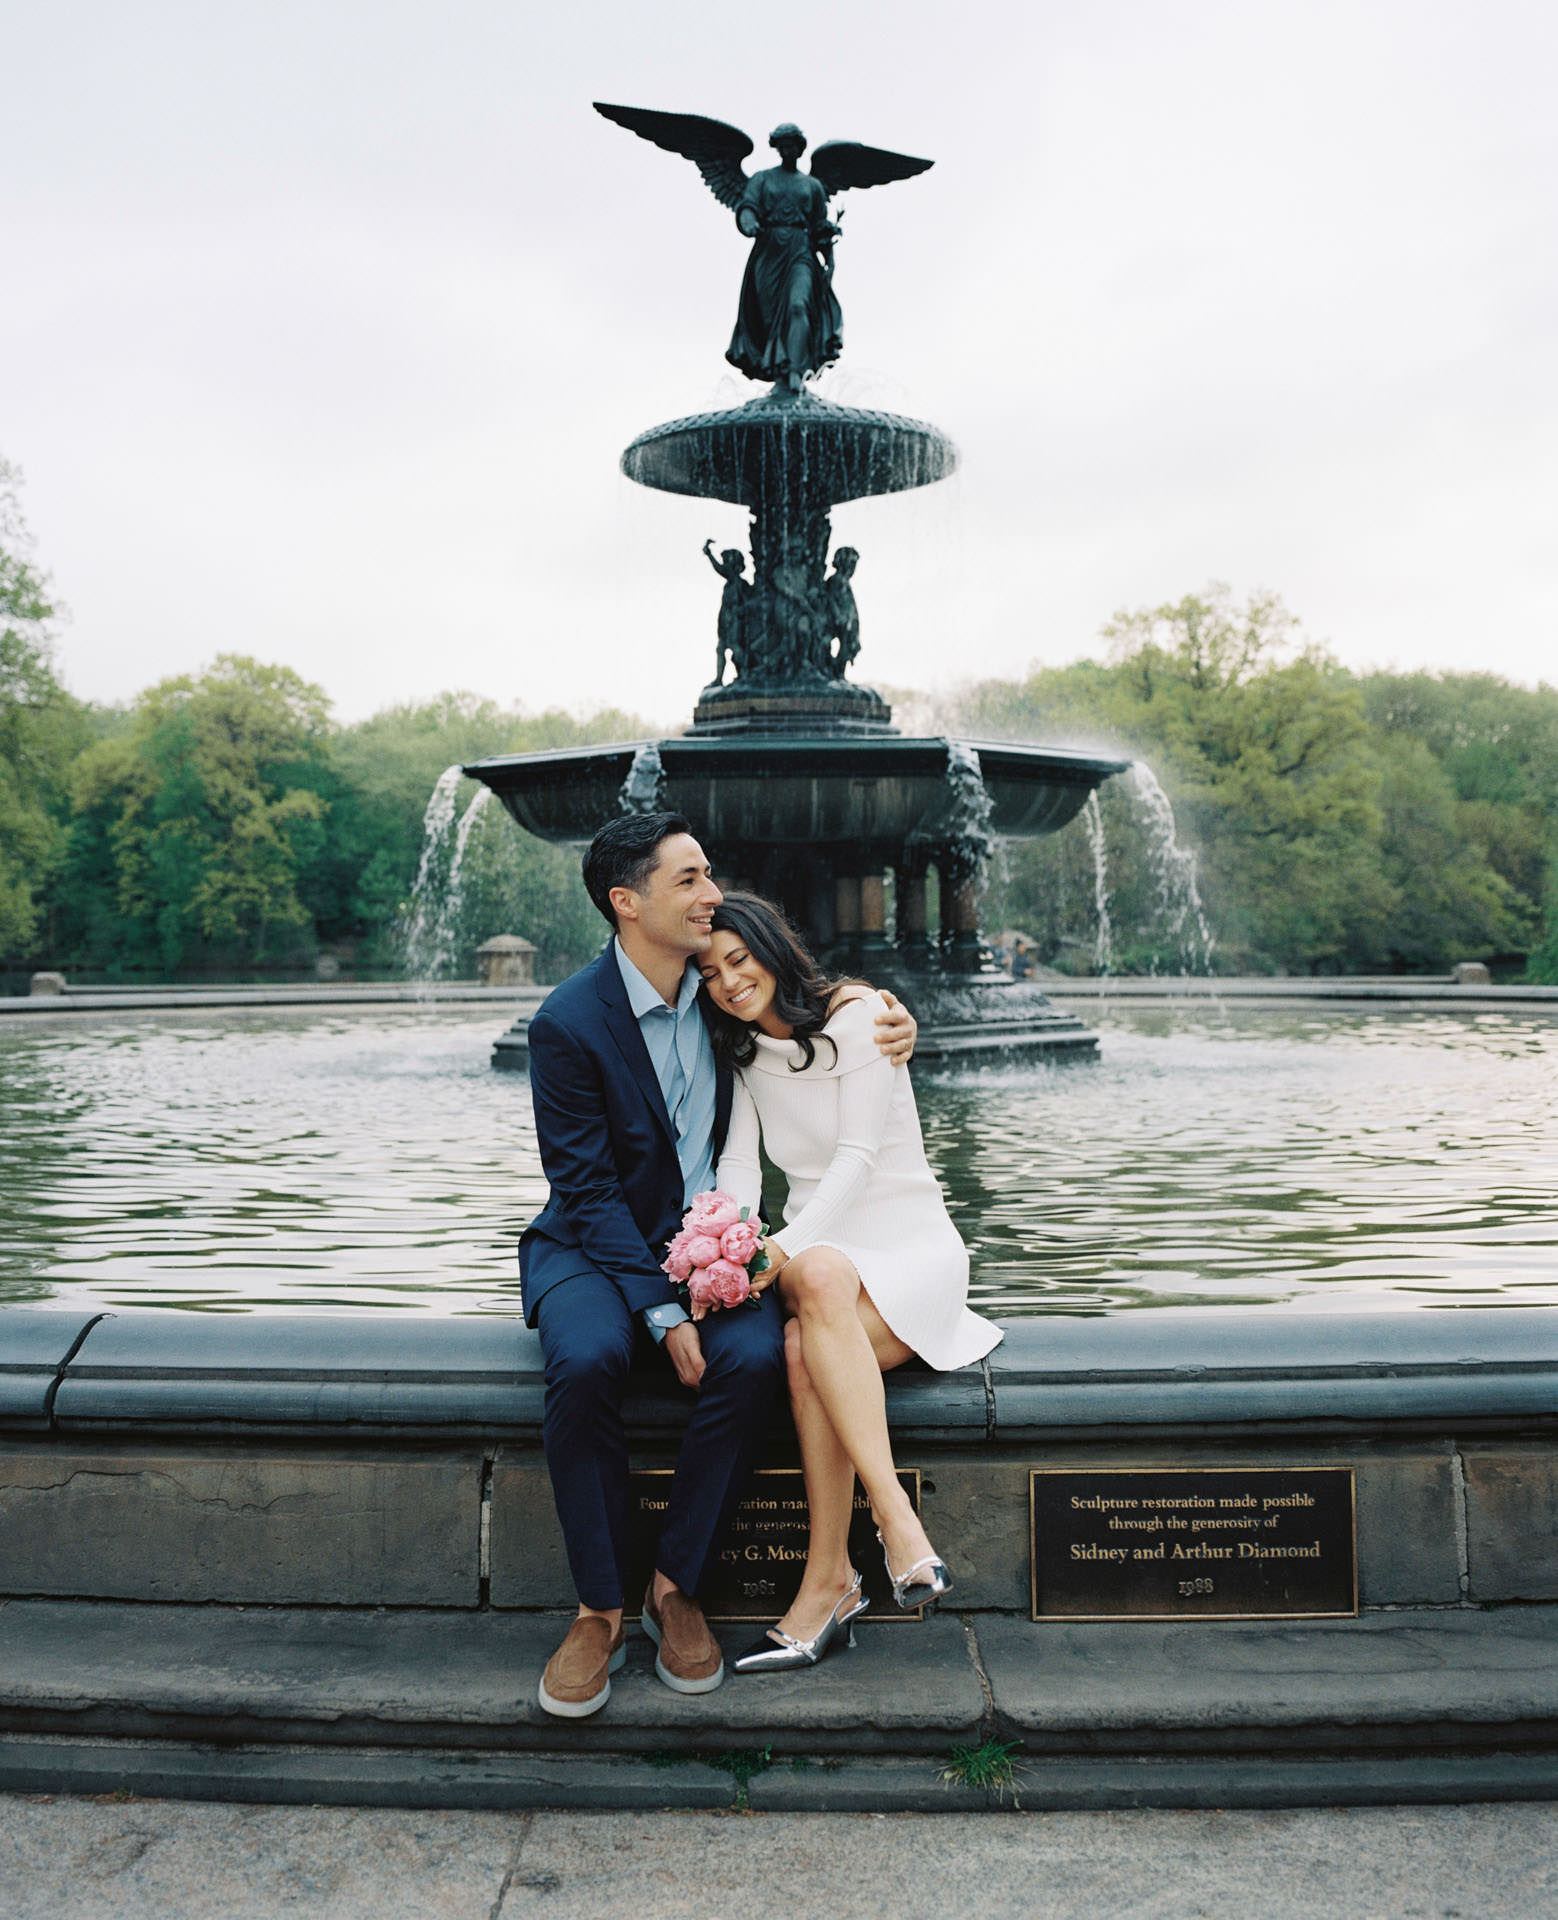 An engaged couple posing lovingly in front of the Bethesda Fountain, with water cascading in the background.
